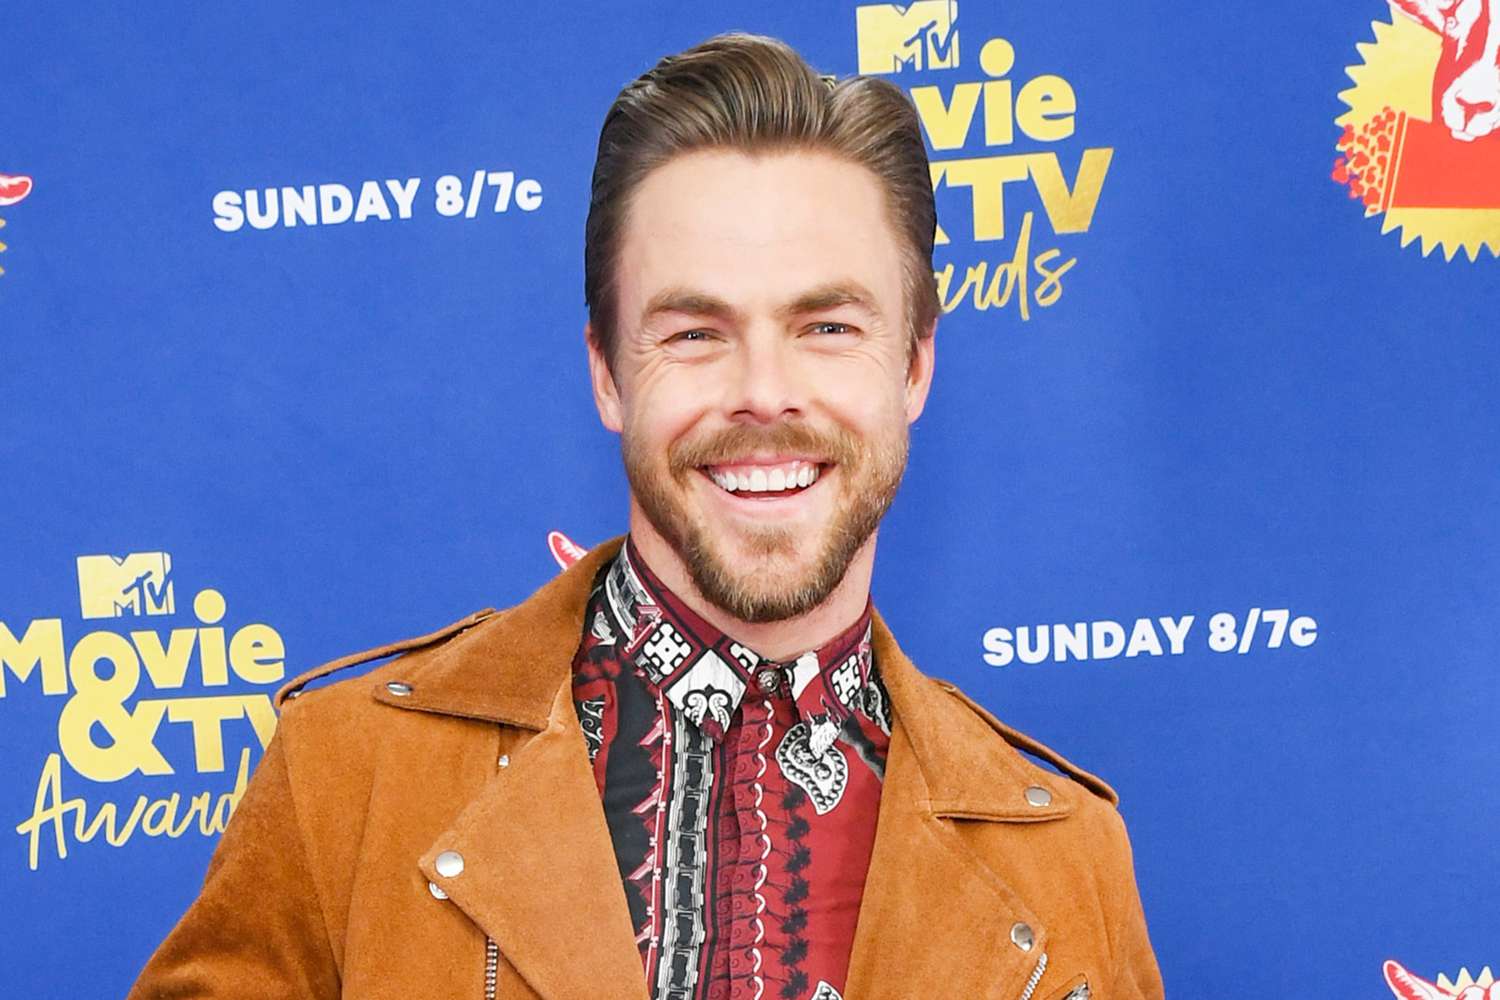 Derek Hough to Perform Las Vegas 'Dance-Centric' Show in Fall 2021 |  PEOPLE.com